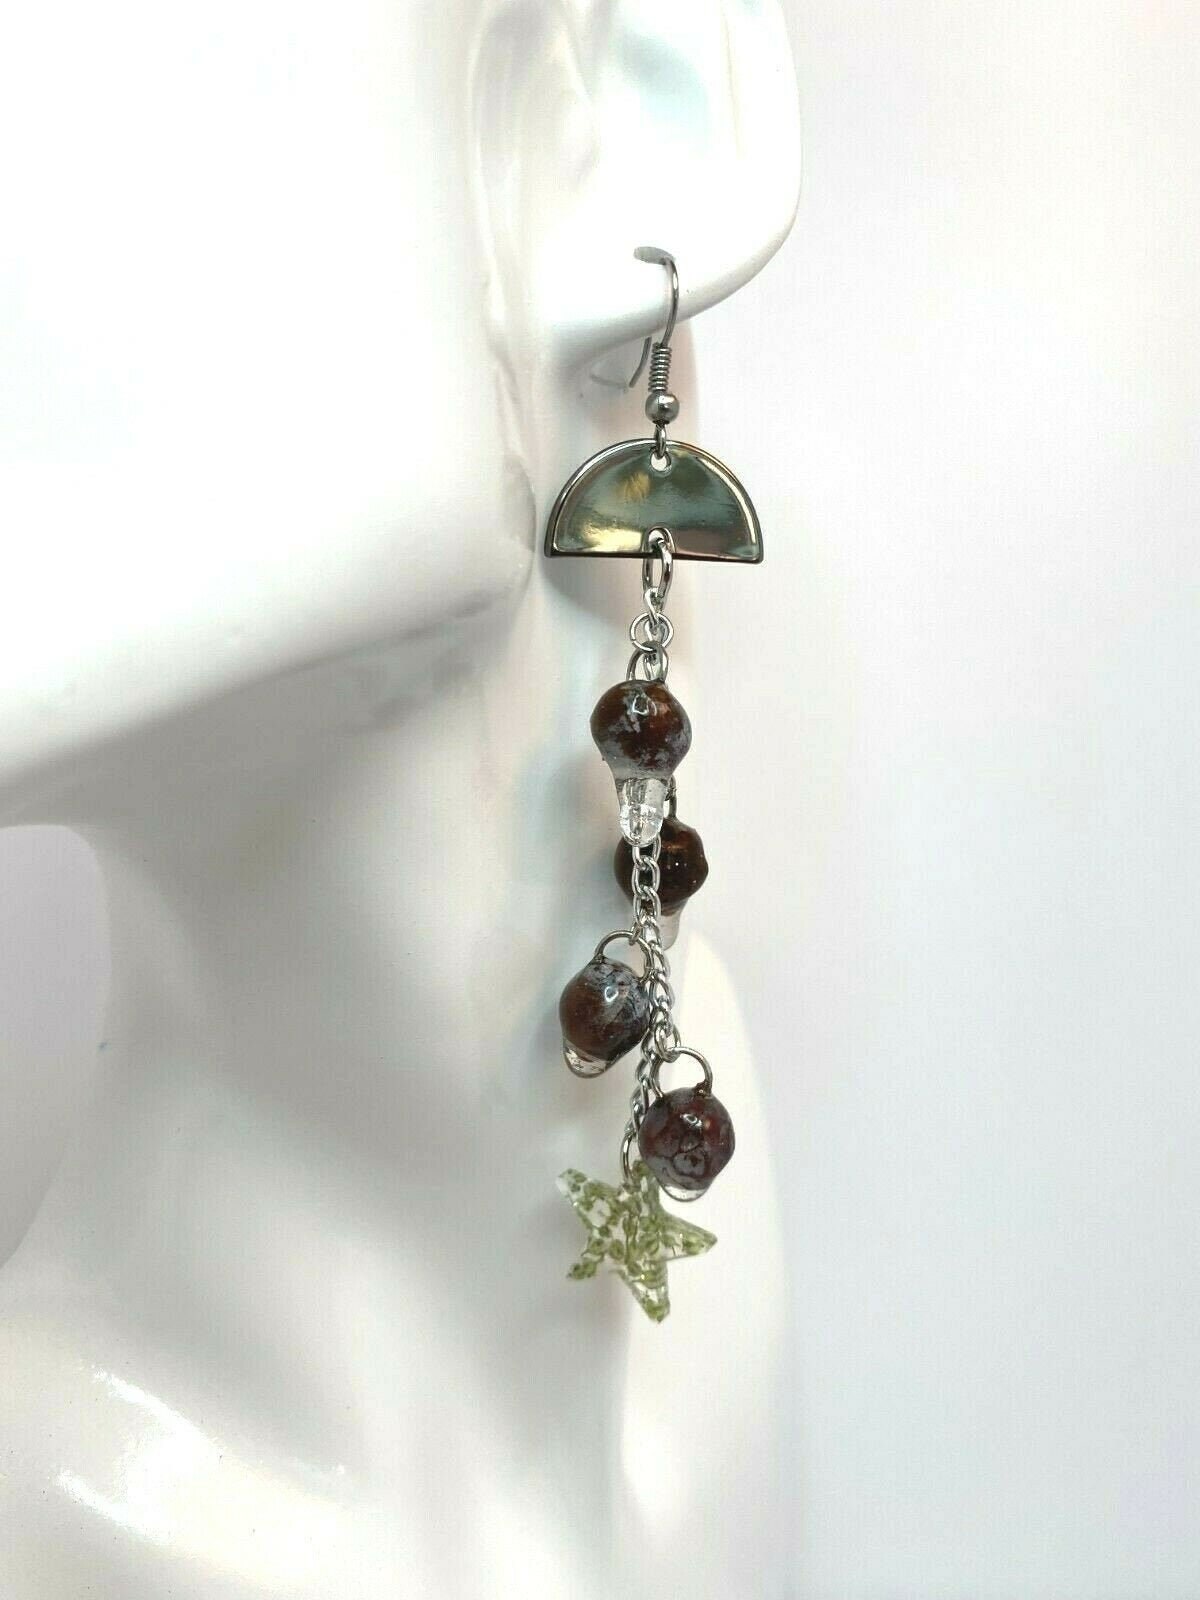 Handmade Juniper Berry Natural Dried Plant Resin Earrings Lightweight, Drop Dangle, Oregon Made, Unique, One Of A Kind.